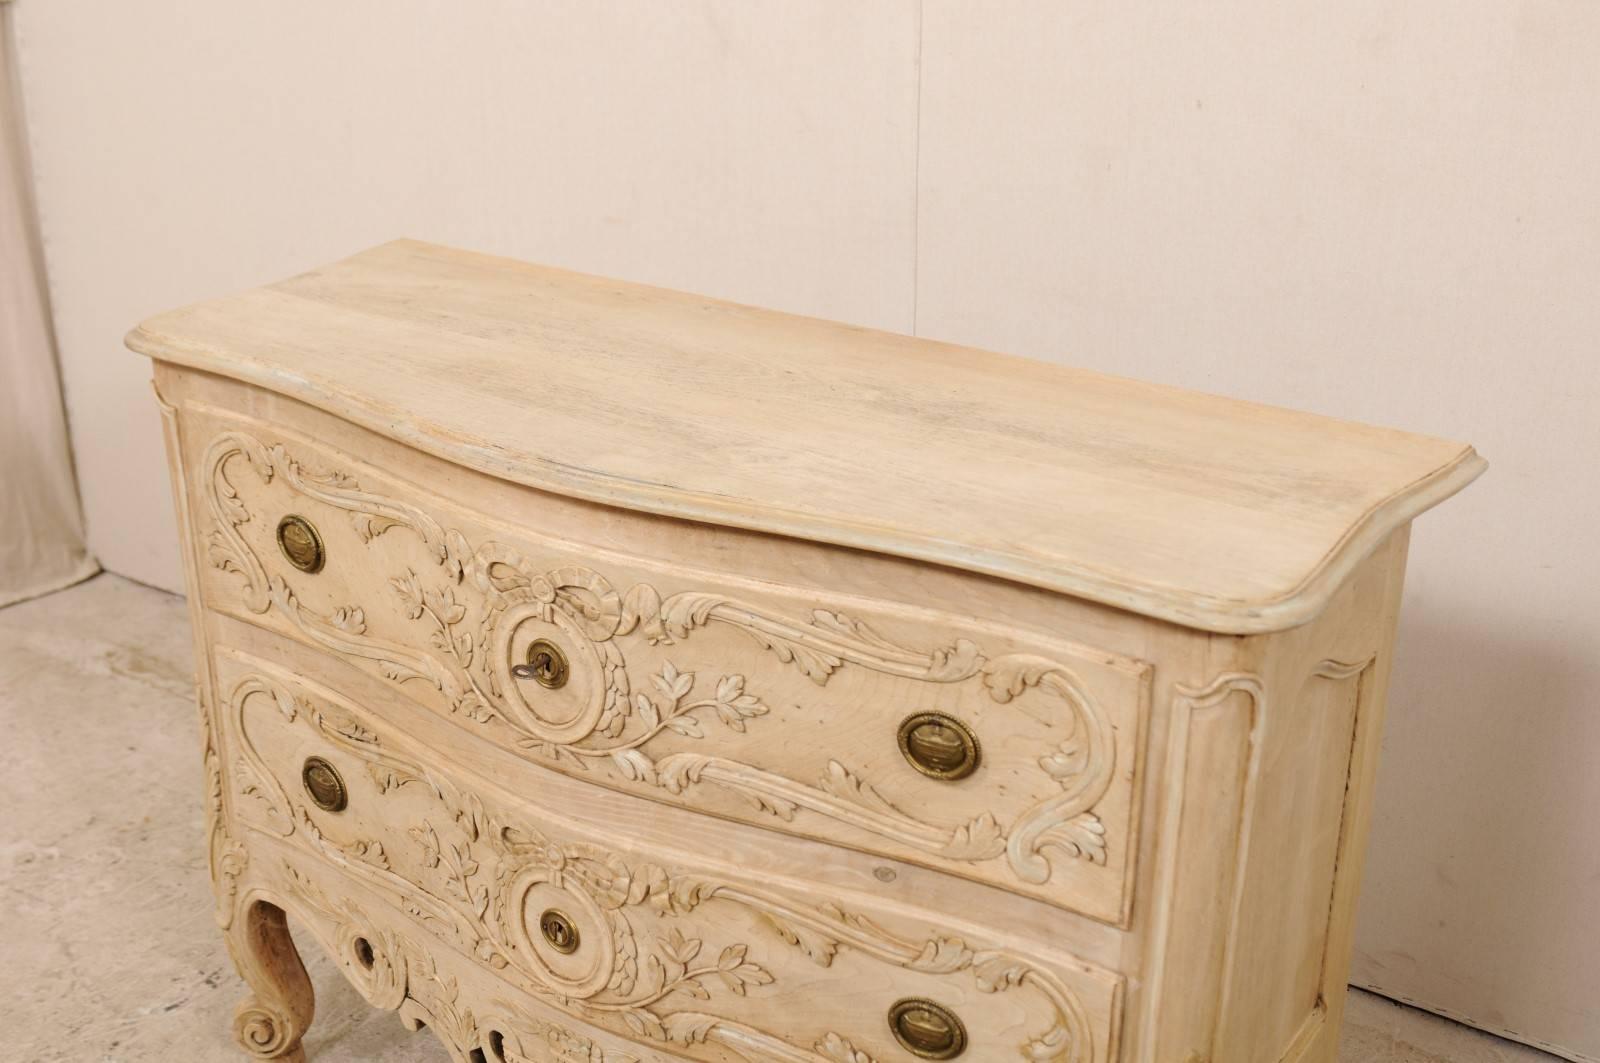 American Exquisite Don Rousseau Mid-20th Century Richly Carved Ash Wood Chest of Drawers